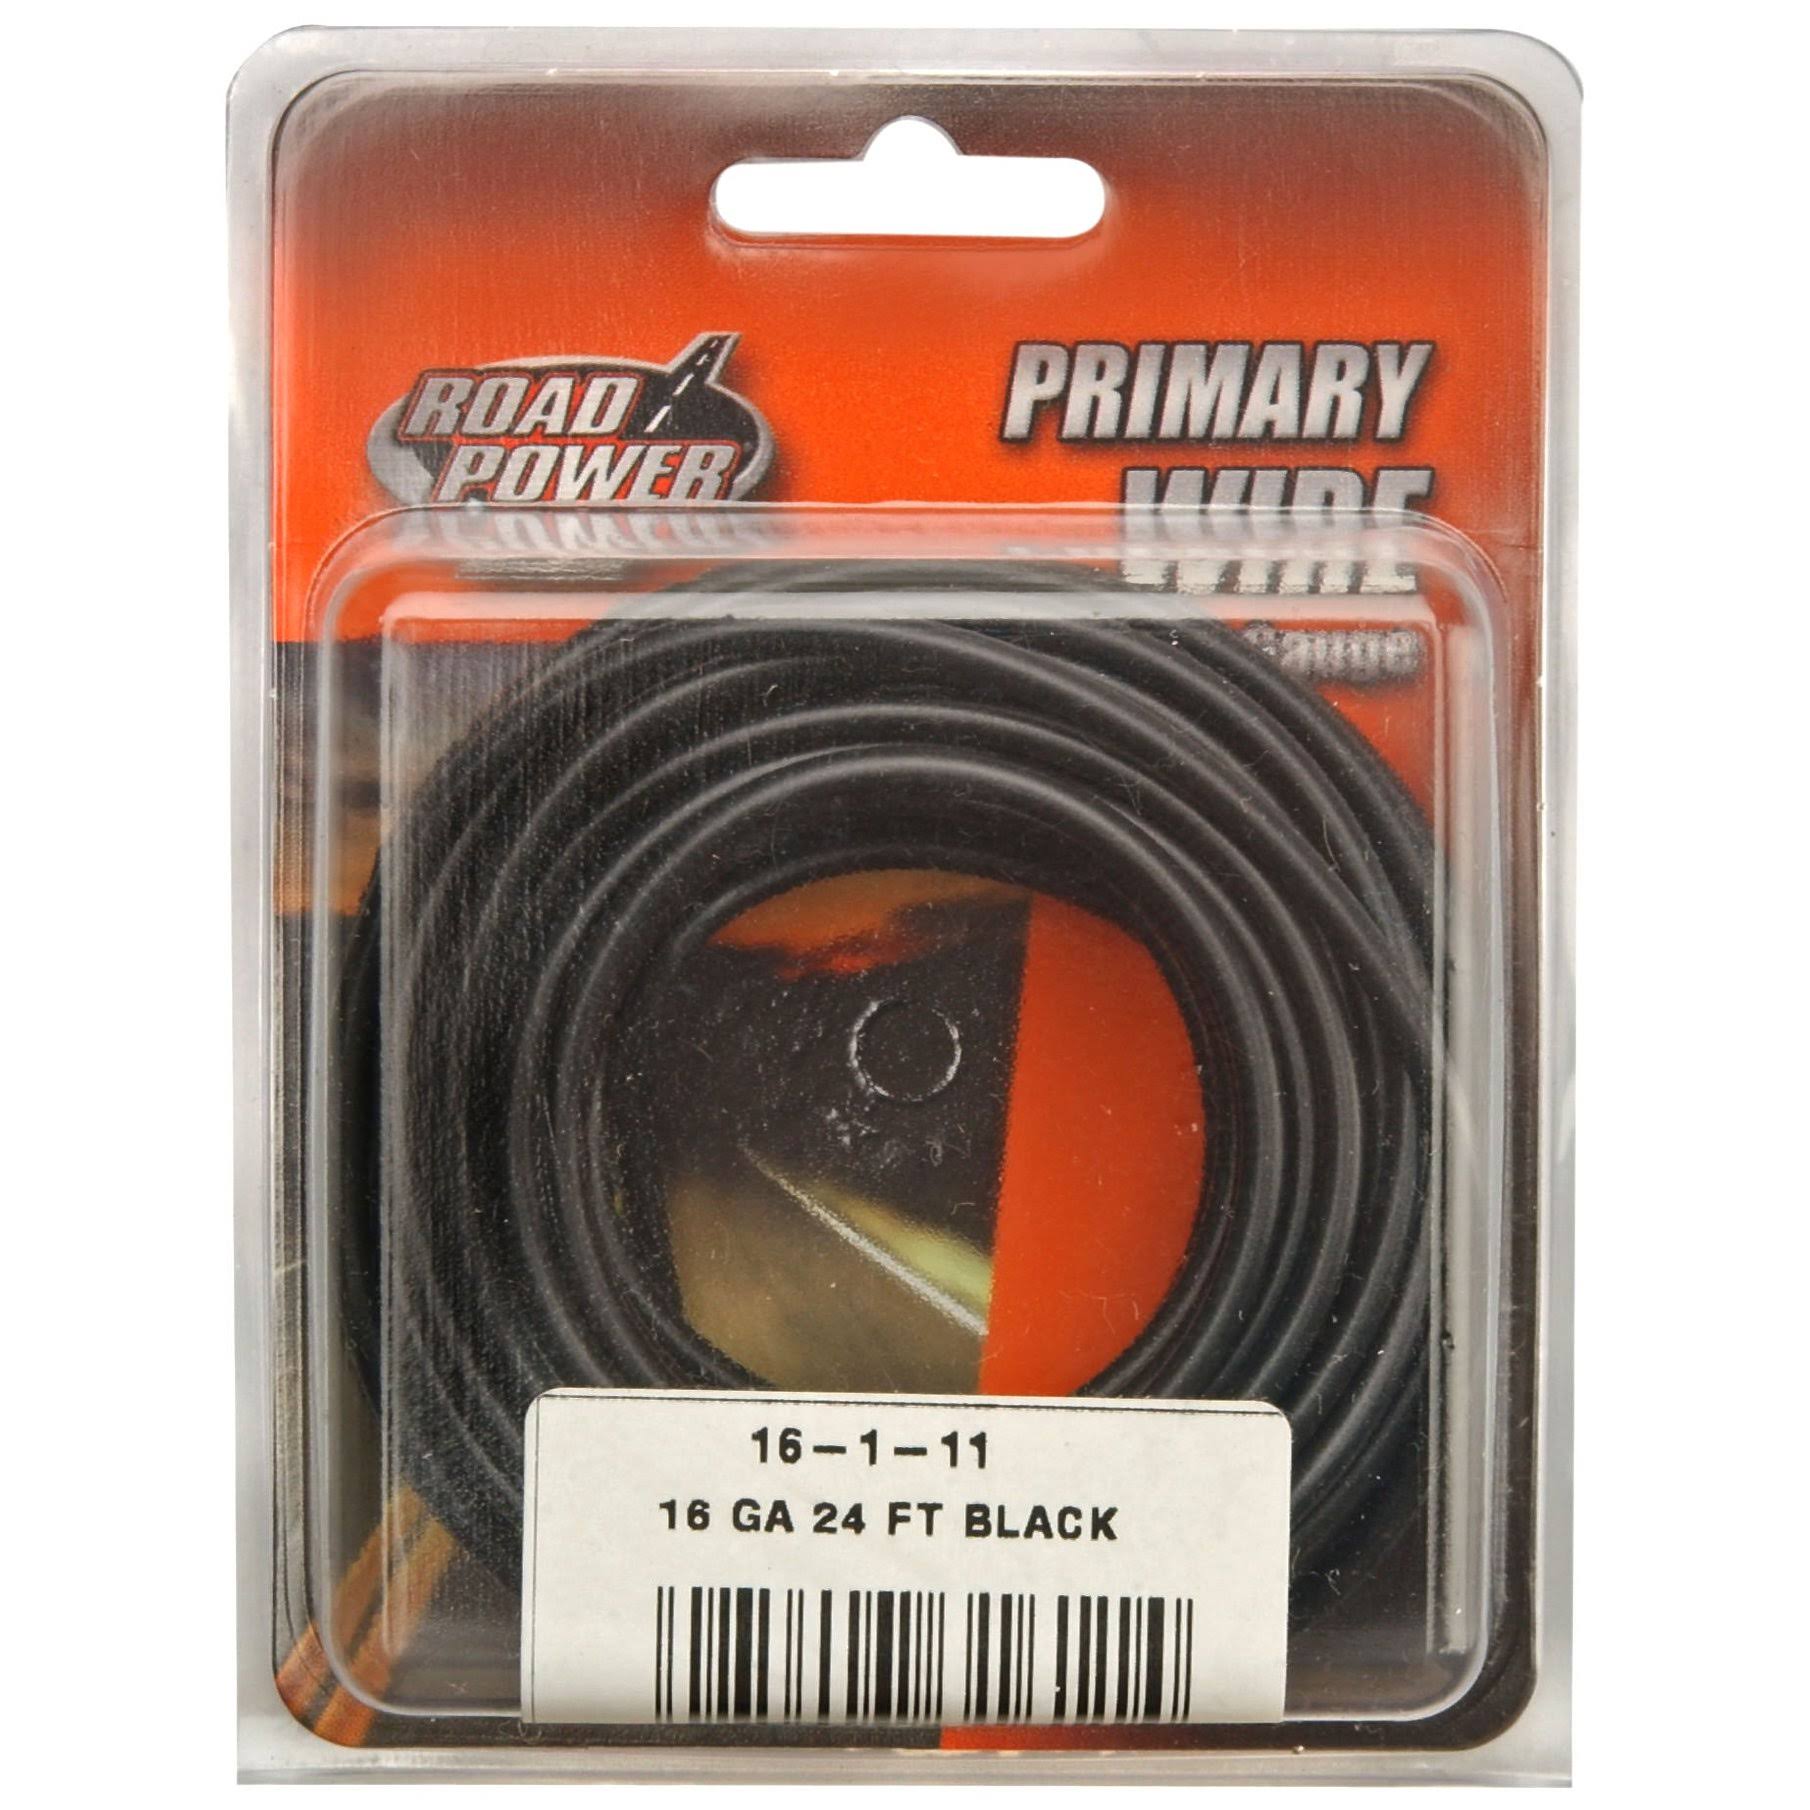 Coleman Cable Road Power Primary Wire - Black, 18 Gauge